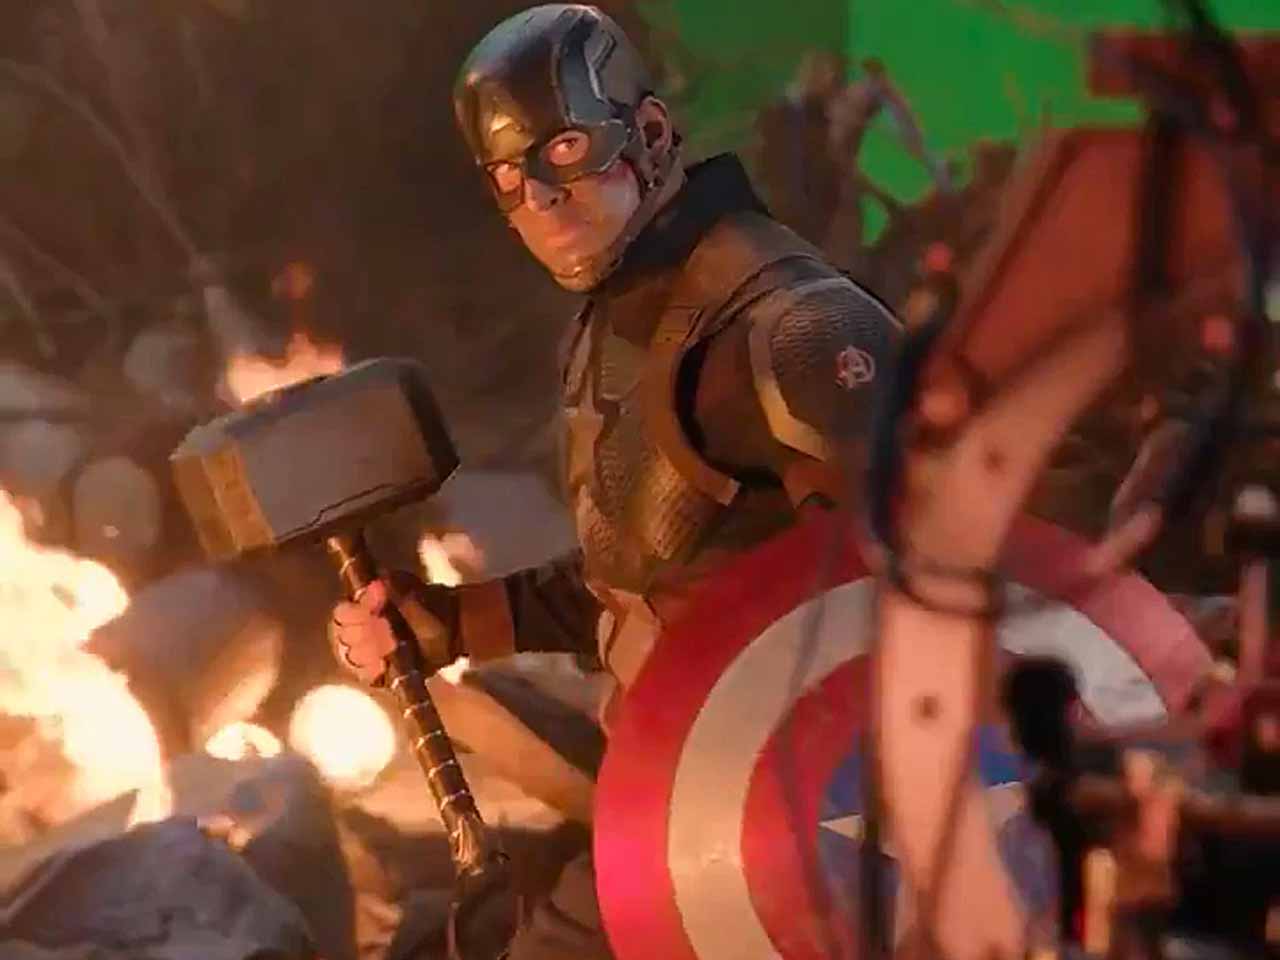 Avengers: Endgame Behind The Scenes Shows A Peek At Captain America's “ Worthy” Moment